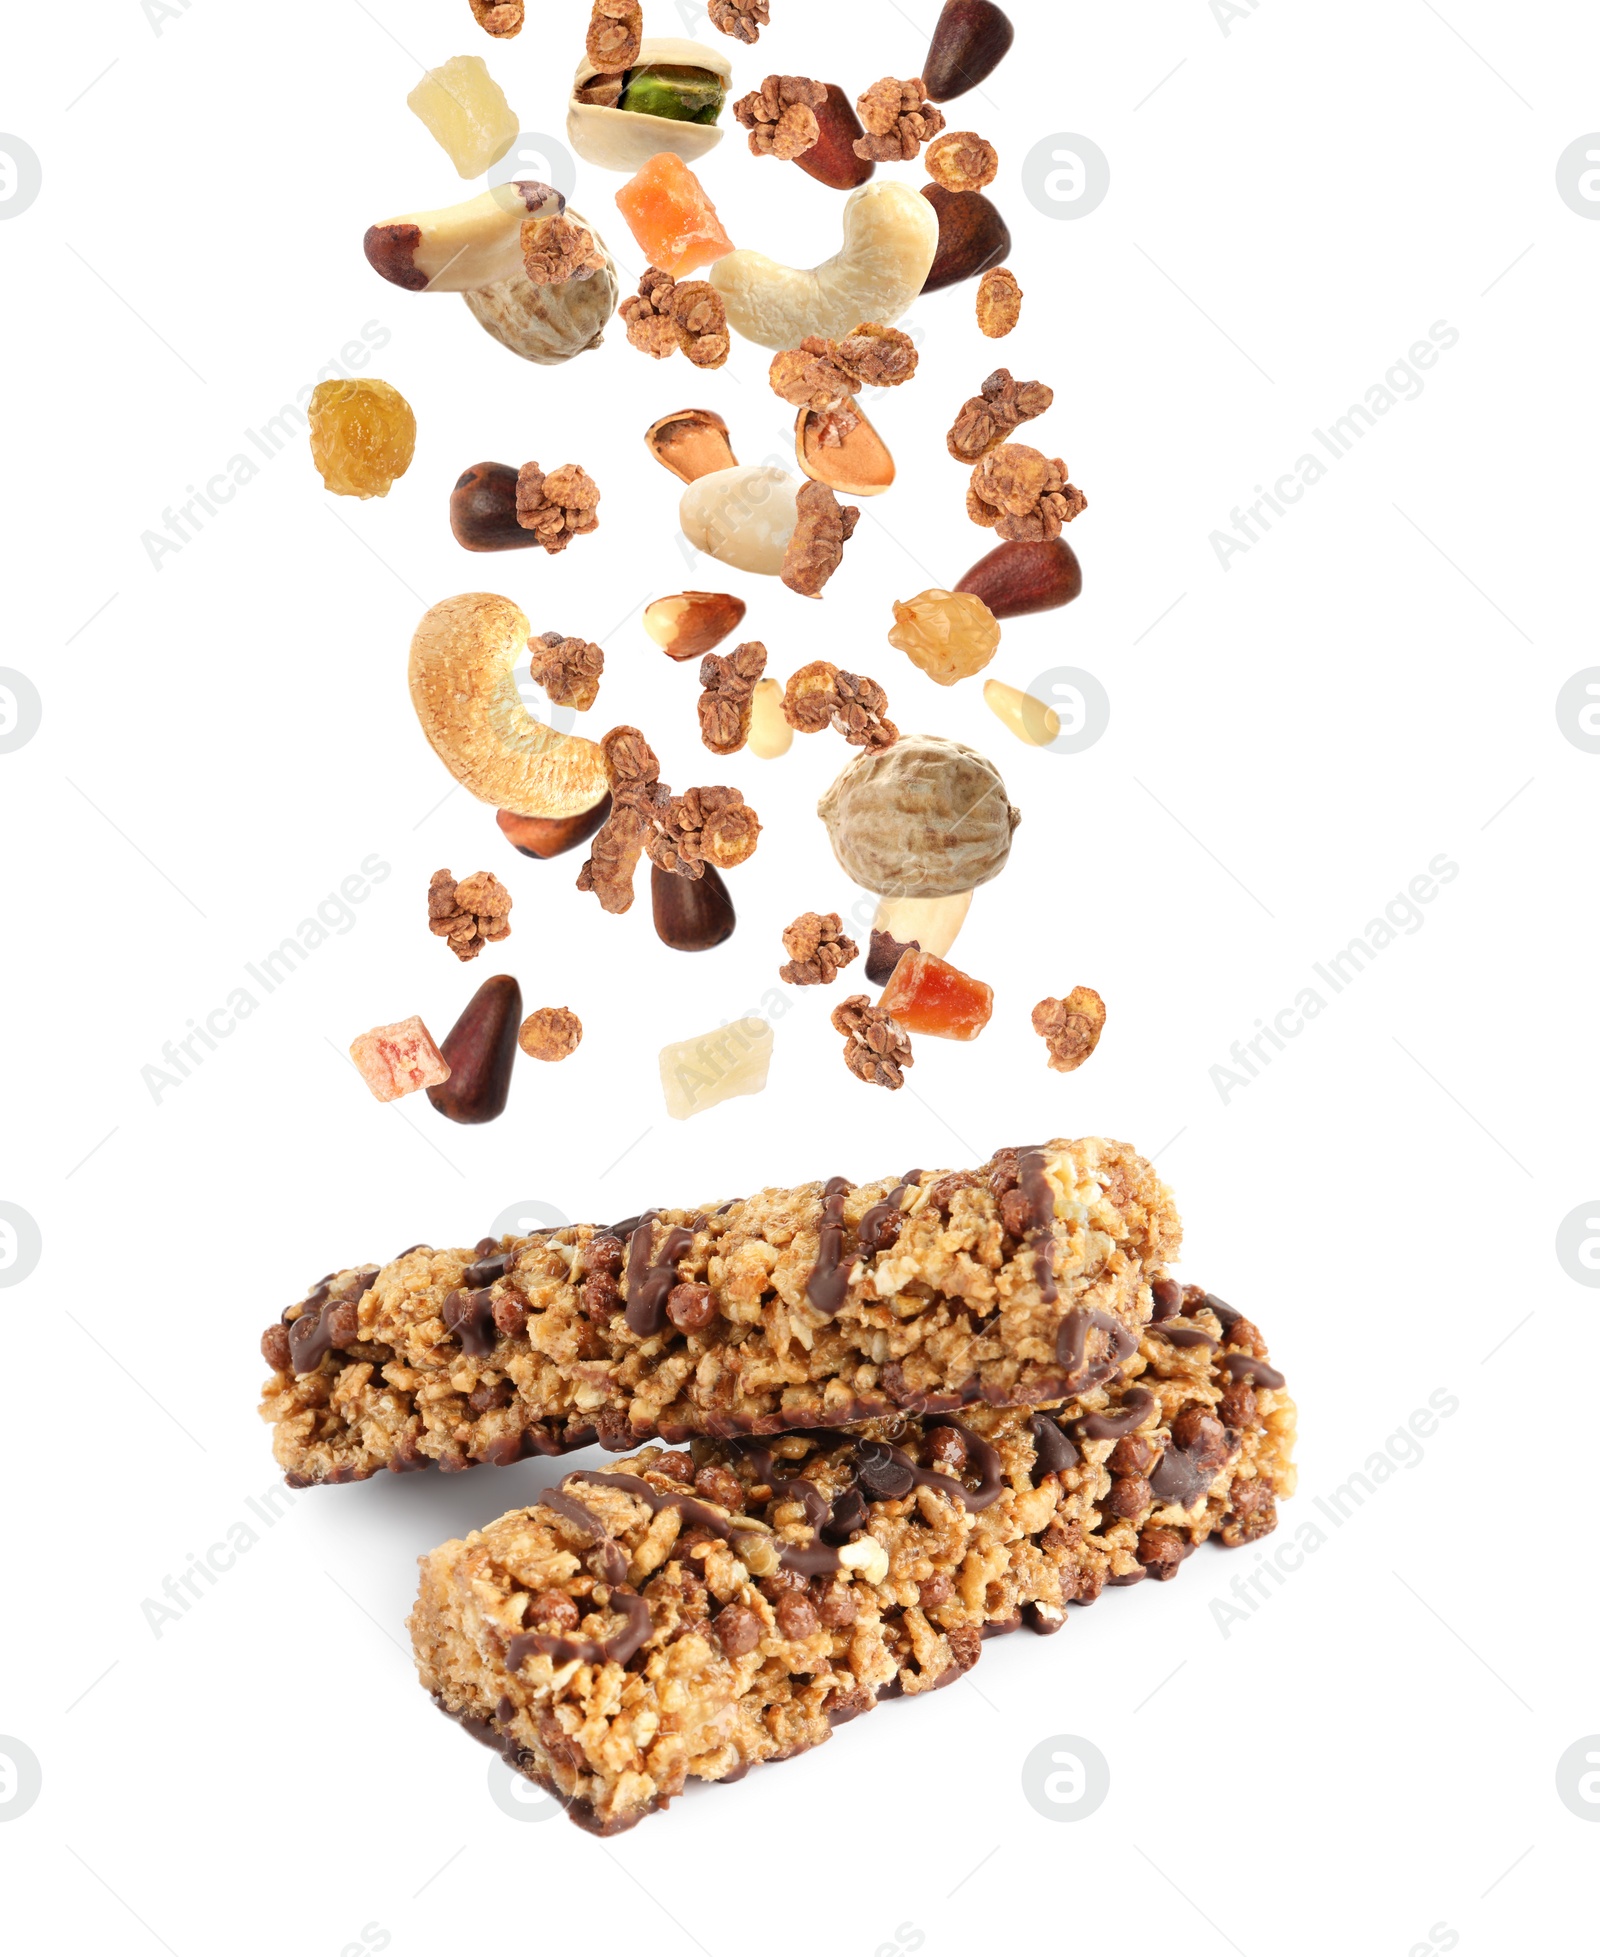 Image of Tasty protein bars and granola with nuts and dried fruits falling on white background